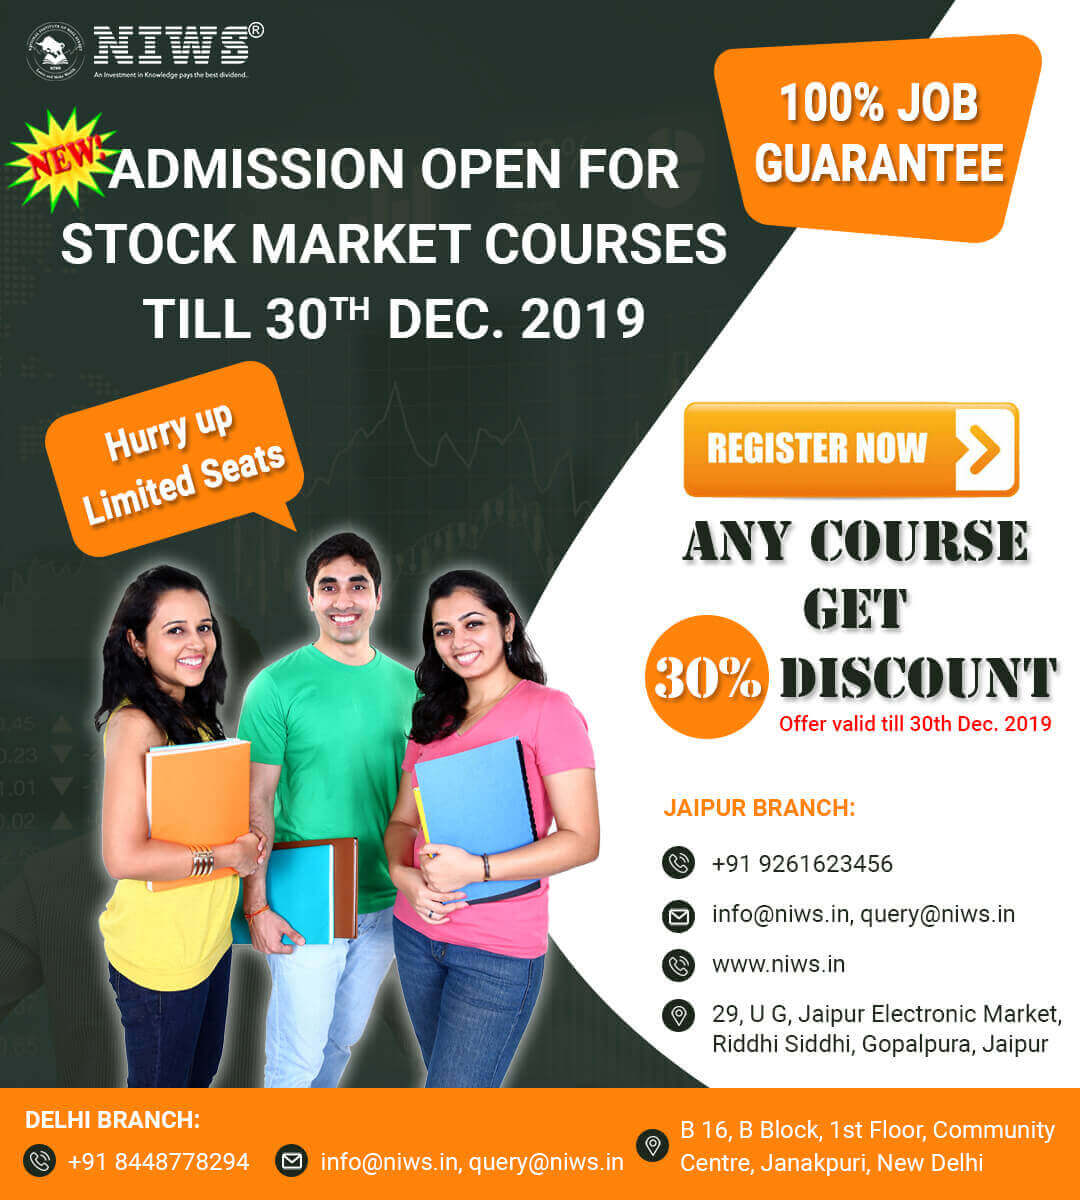 Best Stock Market Course In Delhi & Technical Analysis Course In Delhi, India NIWS.